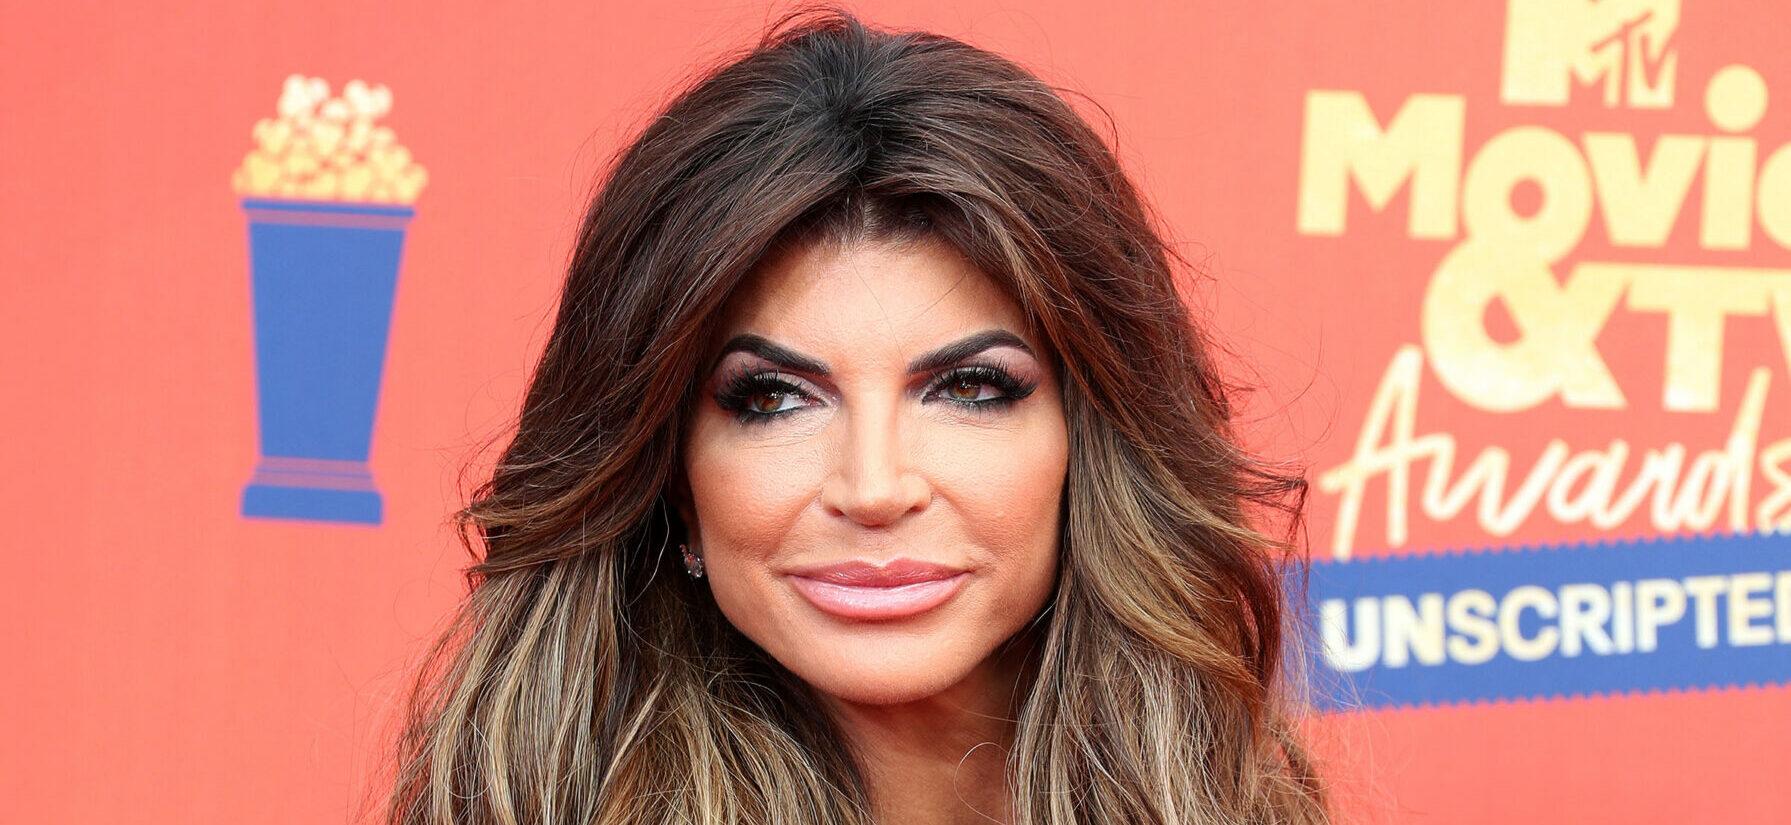 ‘Real Housewives’ Star Teresa Giudice’s Mercedes Stolen From Her New Jersey Home